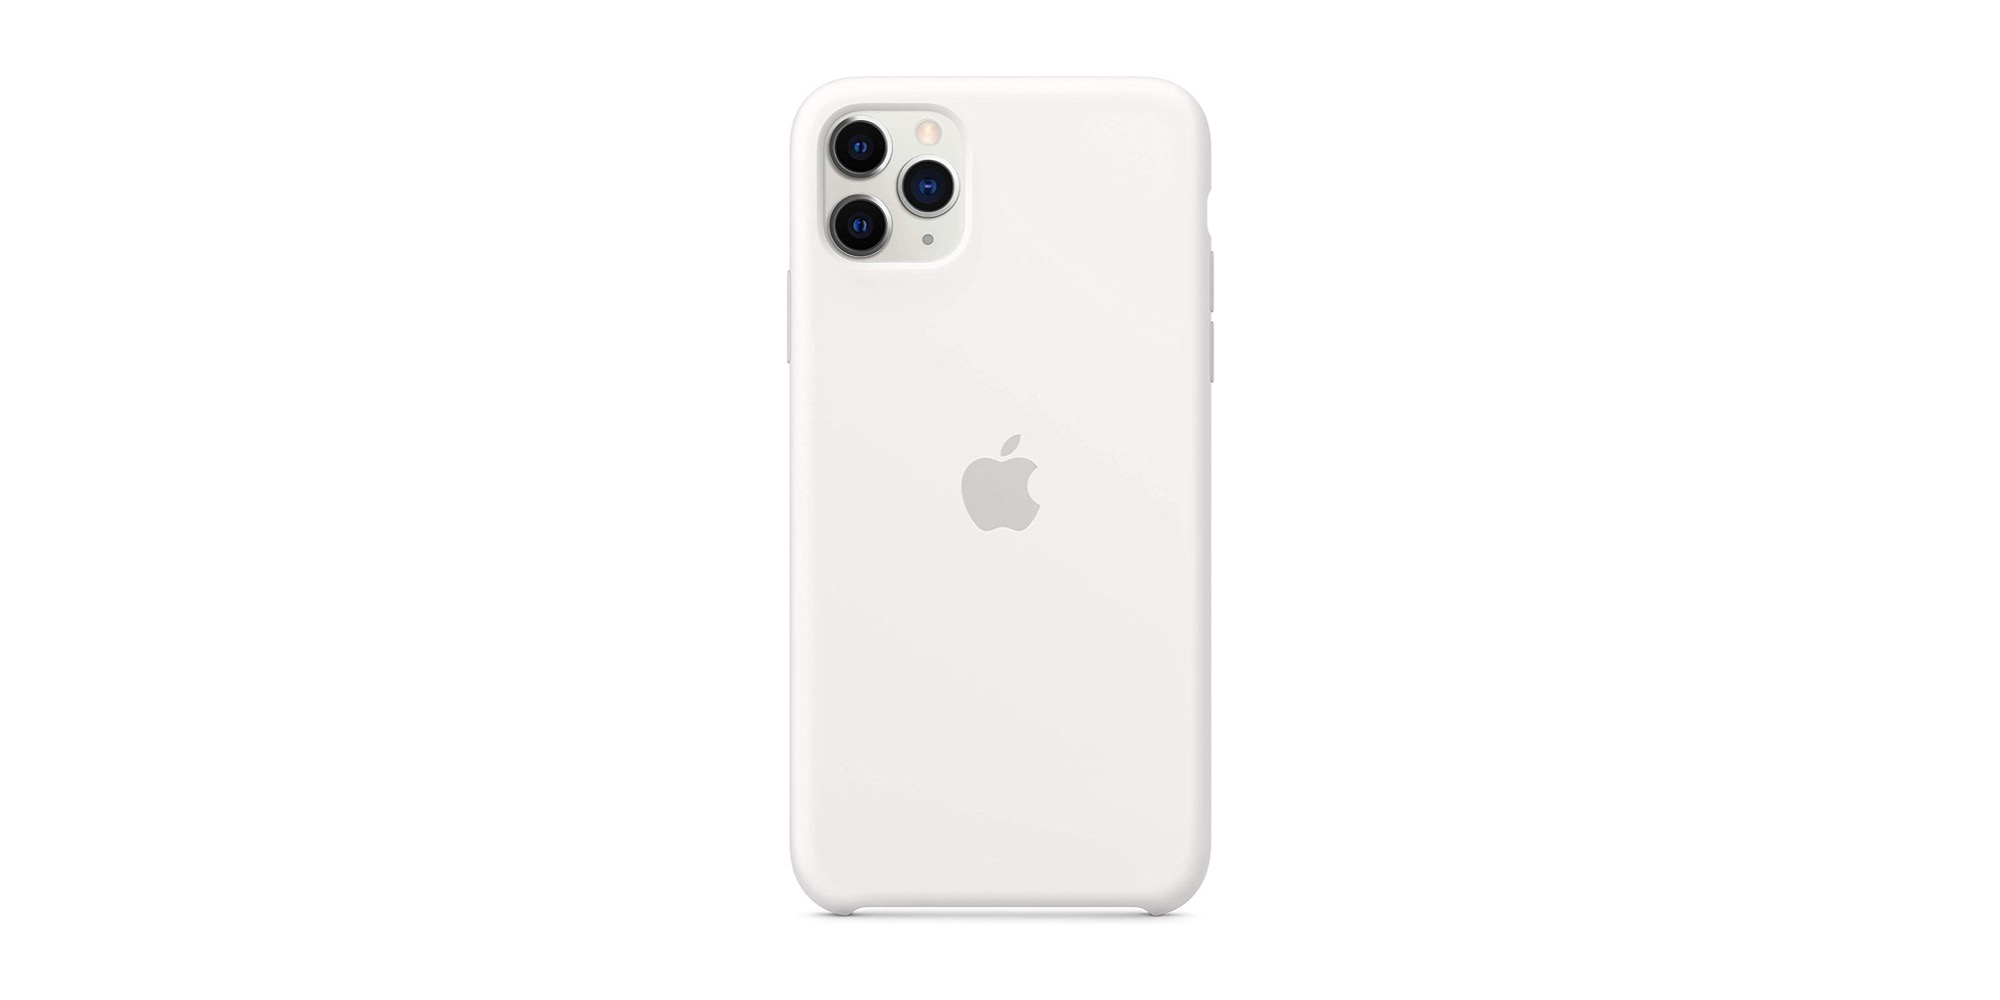 Apple&#39;s iPhone 11 Pro/Max Cases plummet as low as $12 (Up to 70% off) - 9to5Toys